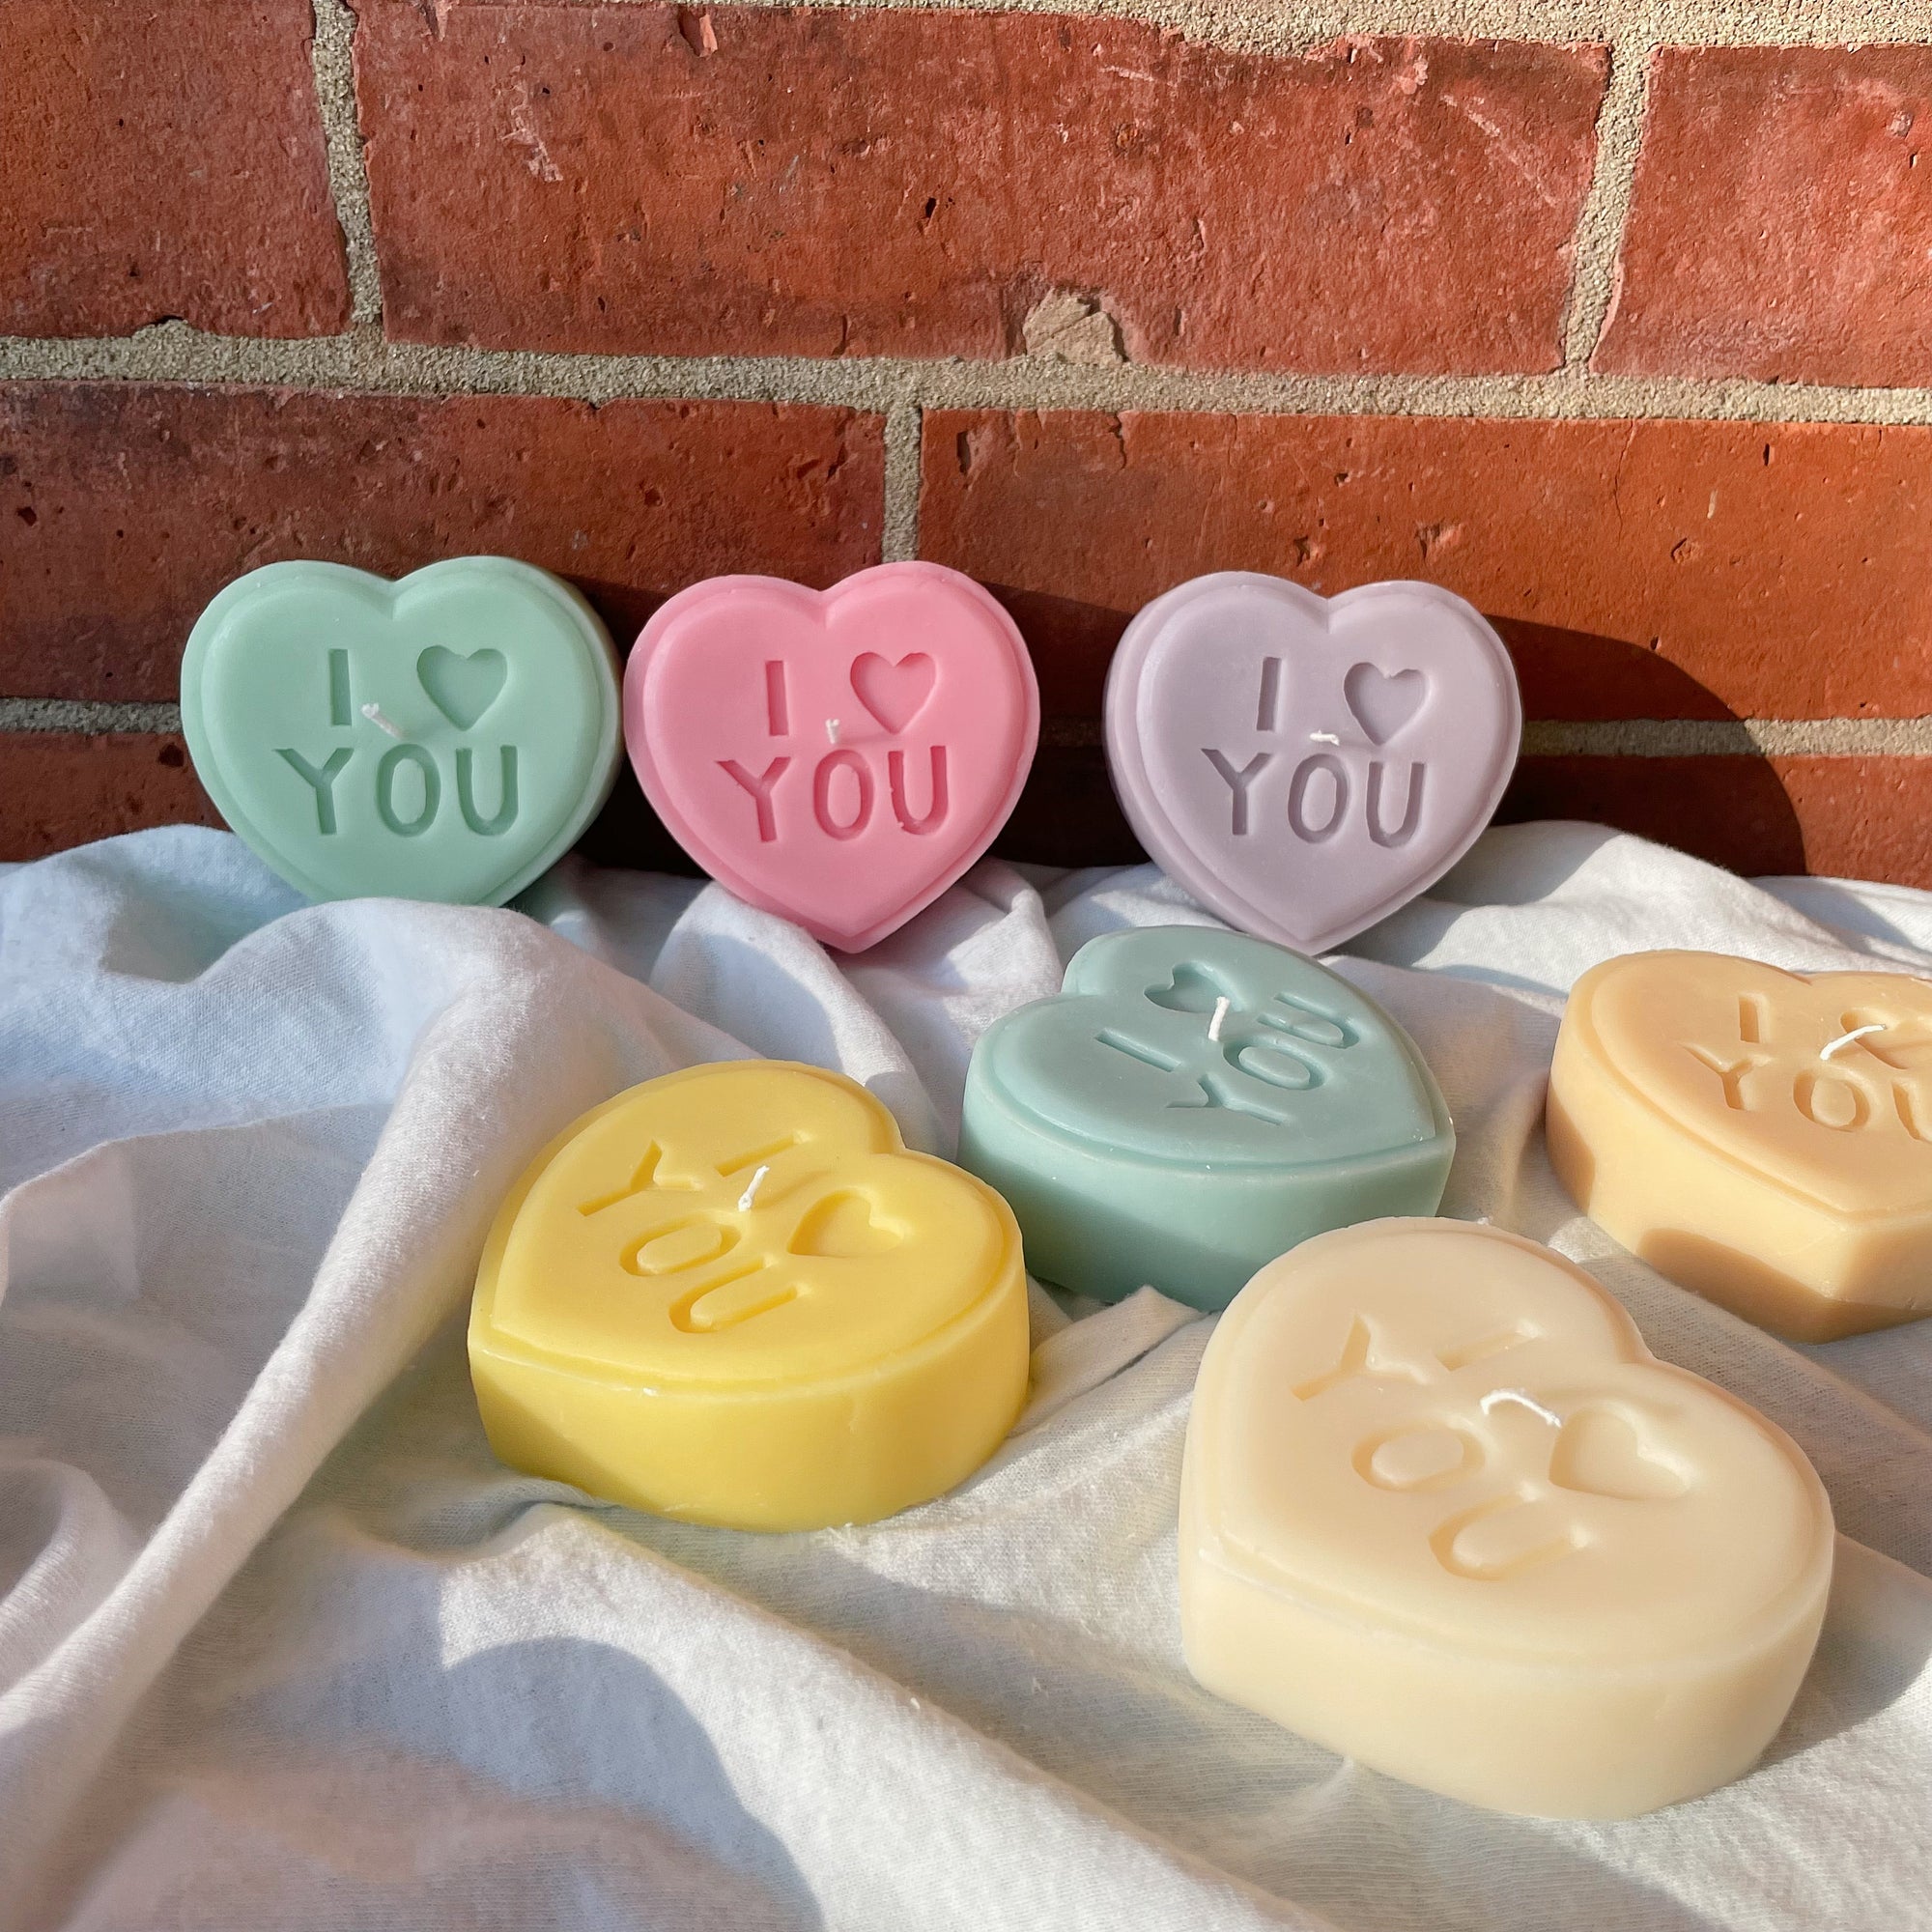 【Ready to ship】I LOVE YOU Heart Candle